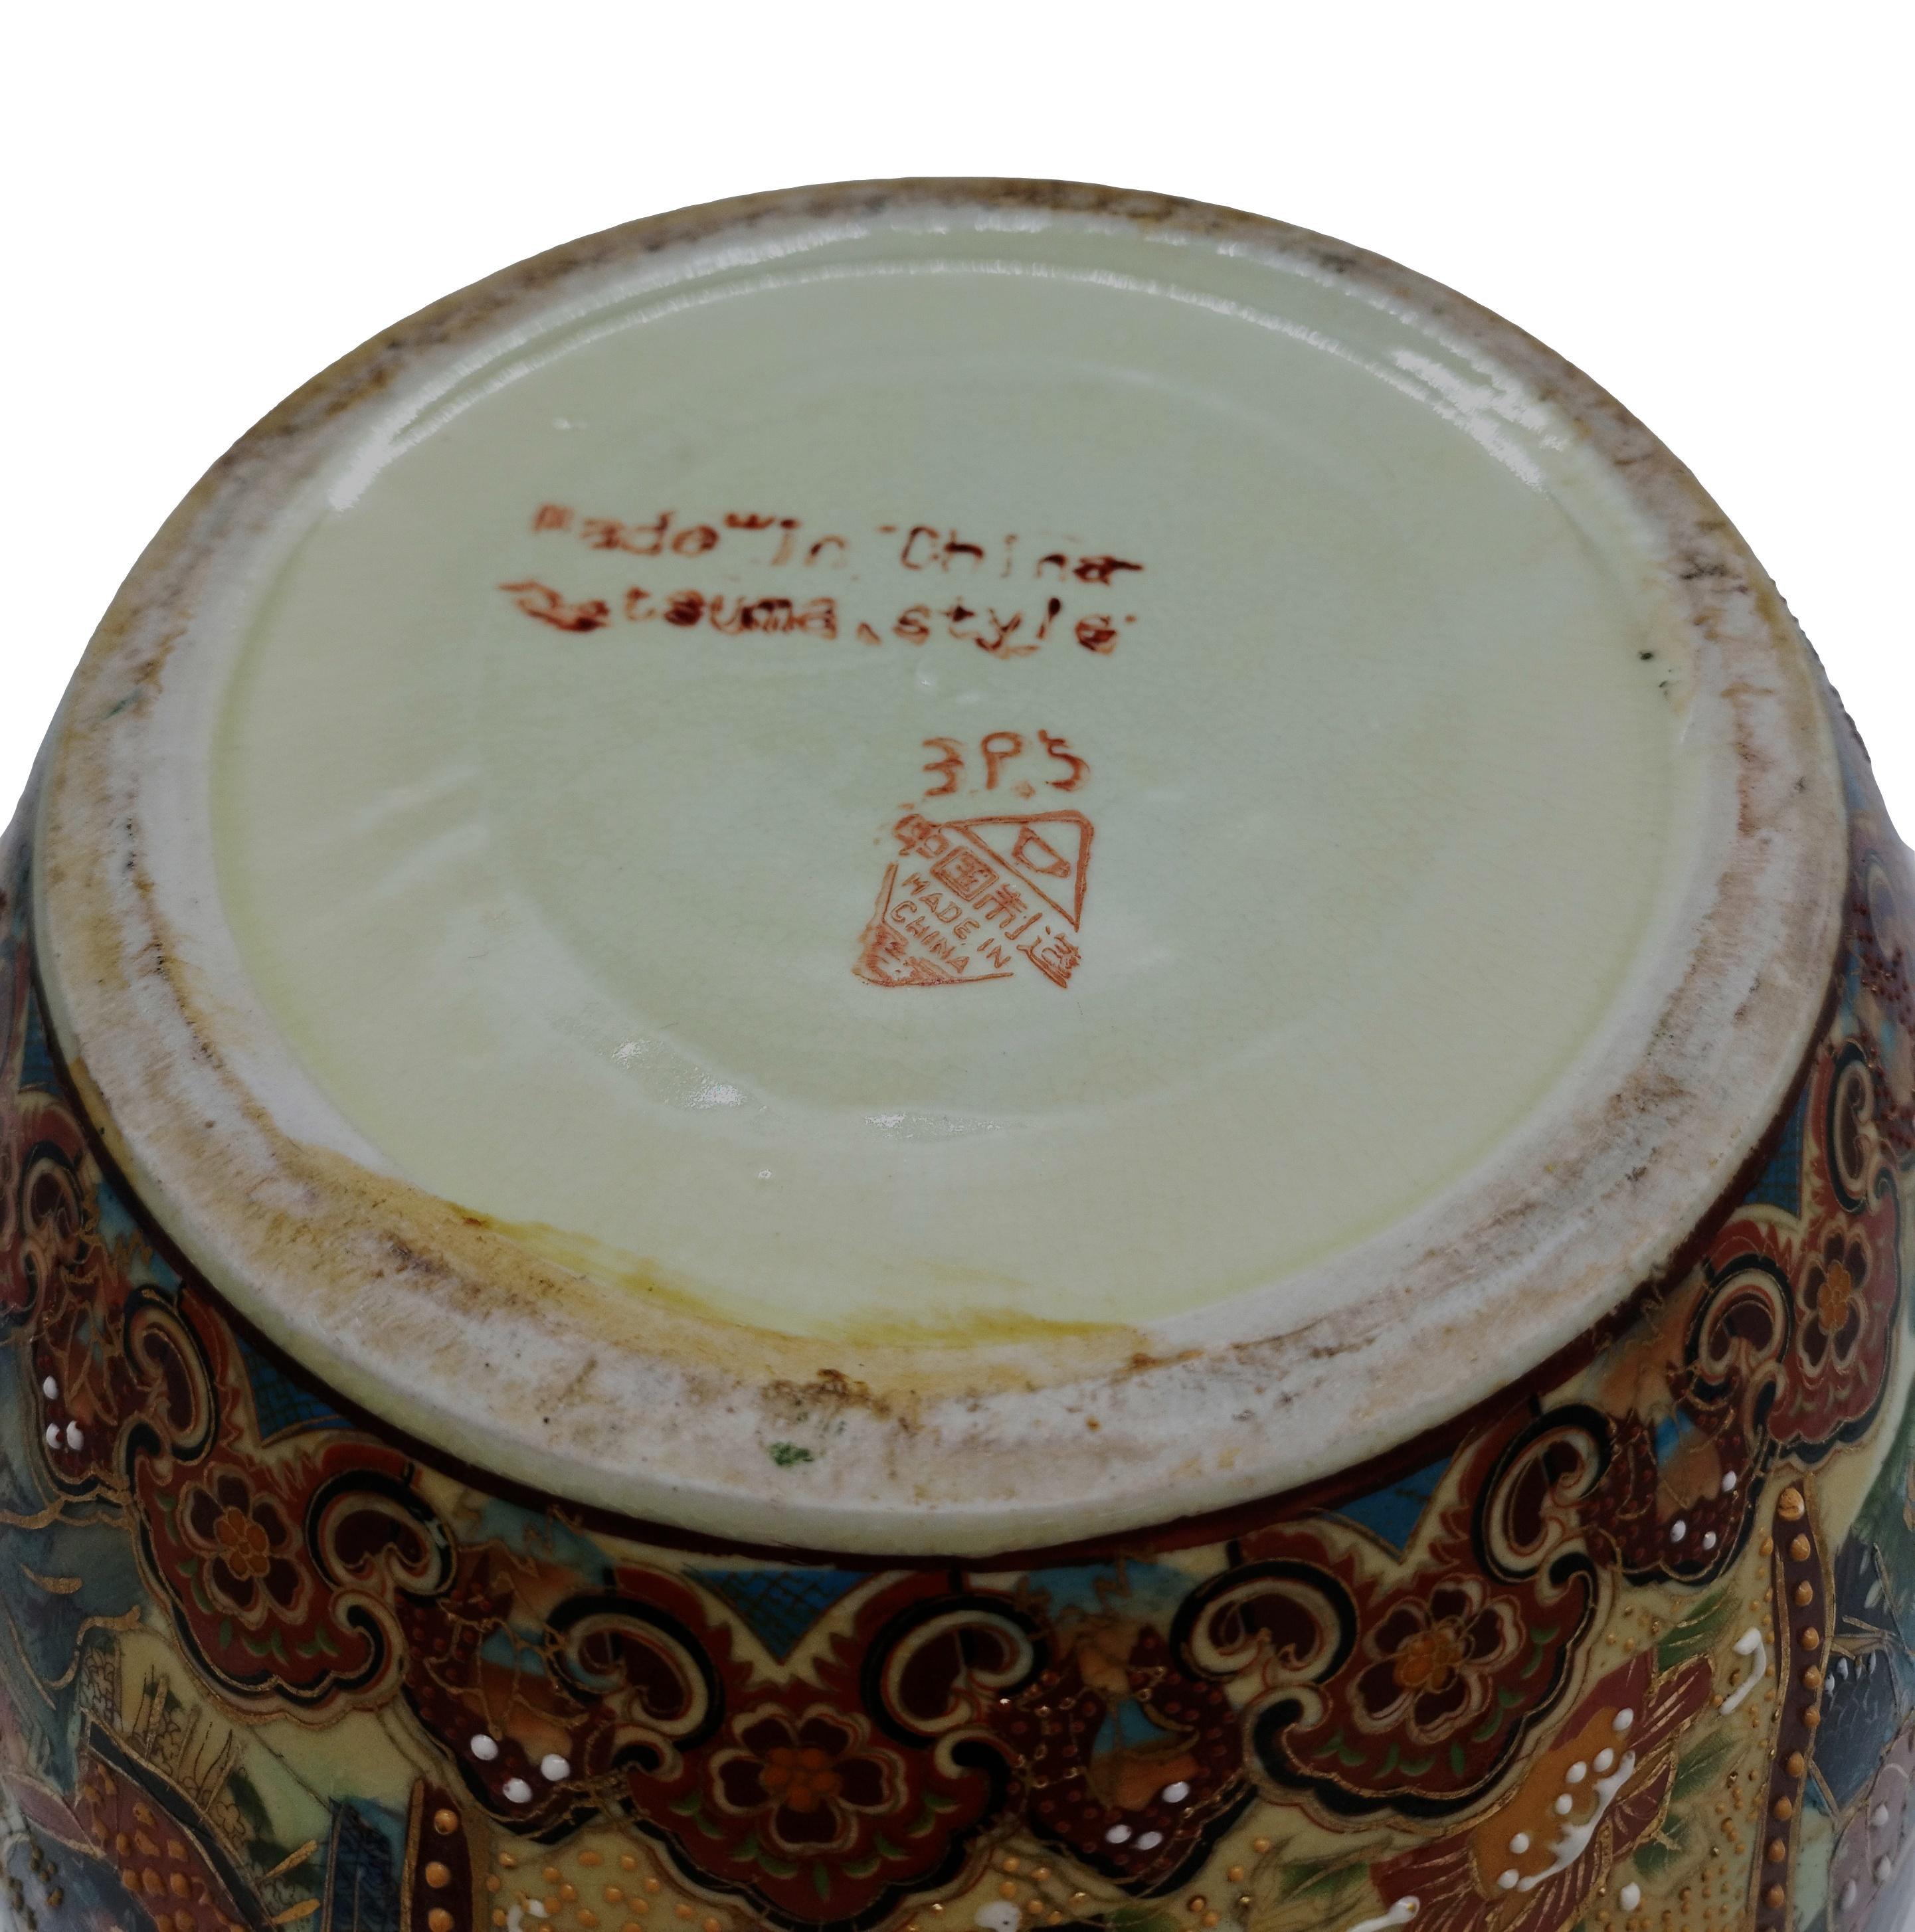 Mid-20th Century Chinese Porcelain Fish Bowl or Planter with Oriental Decorations, China, 1960s For Sale